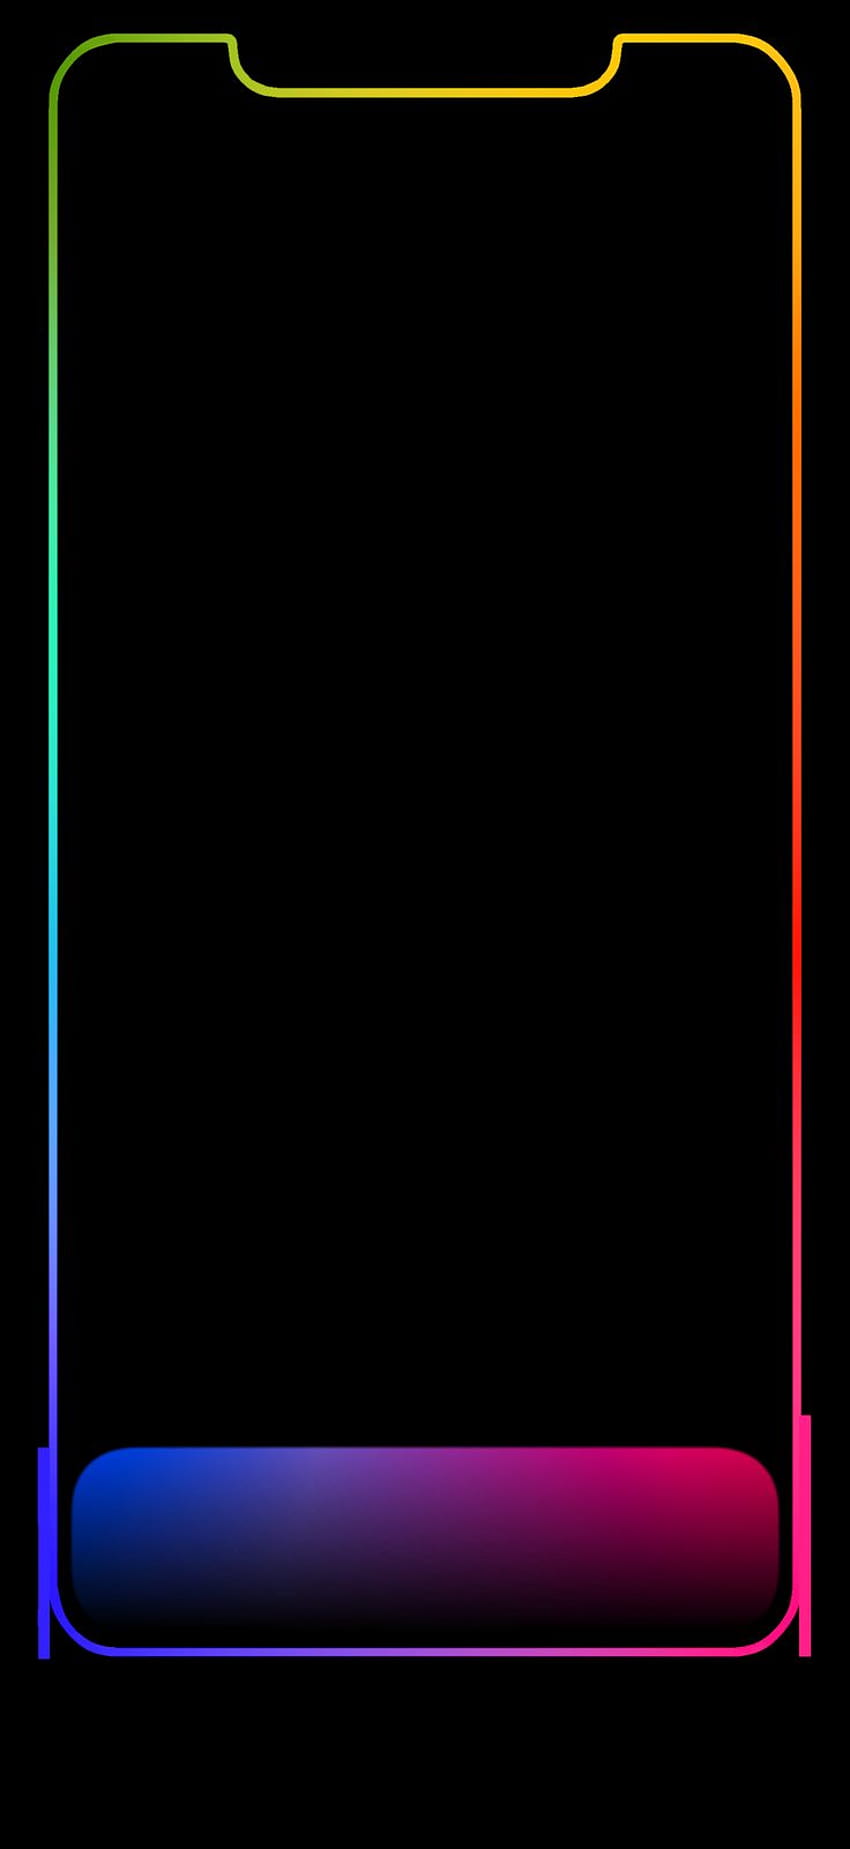 IPhone XS Max Outline, iphone 8 border HD phone wallpaper | Pxfuel